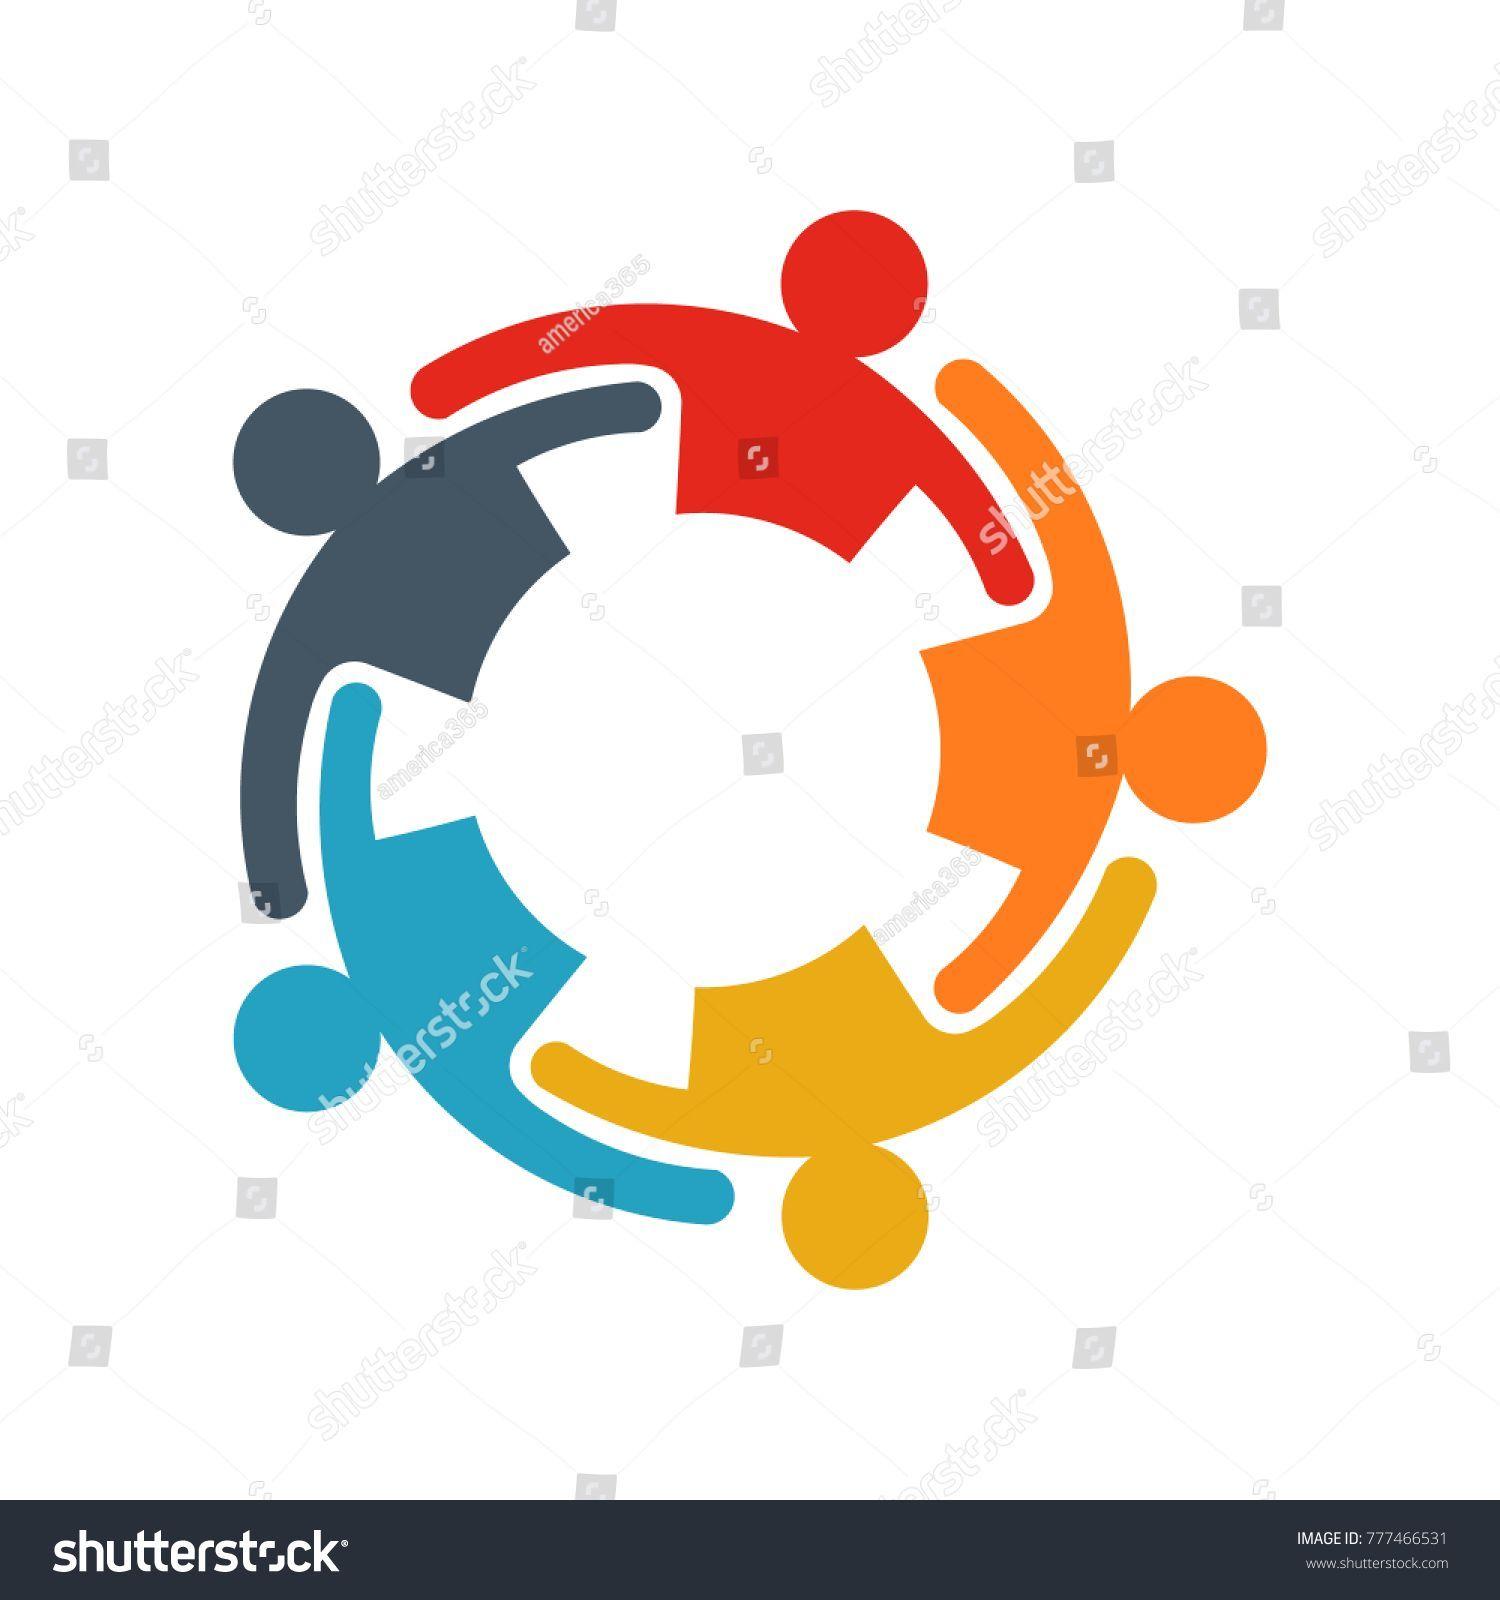 Business People Logo - Group of business people.Business people sharing their ideas. Logo